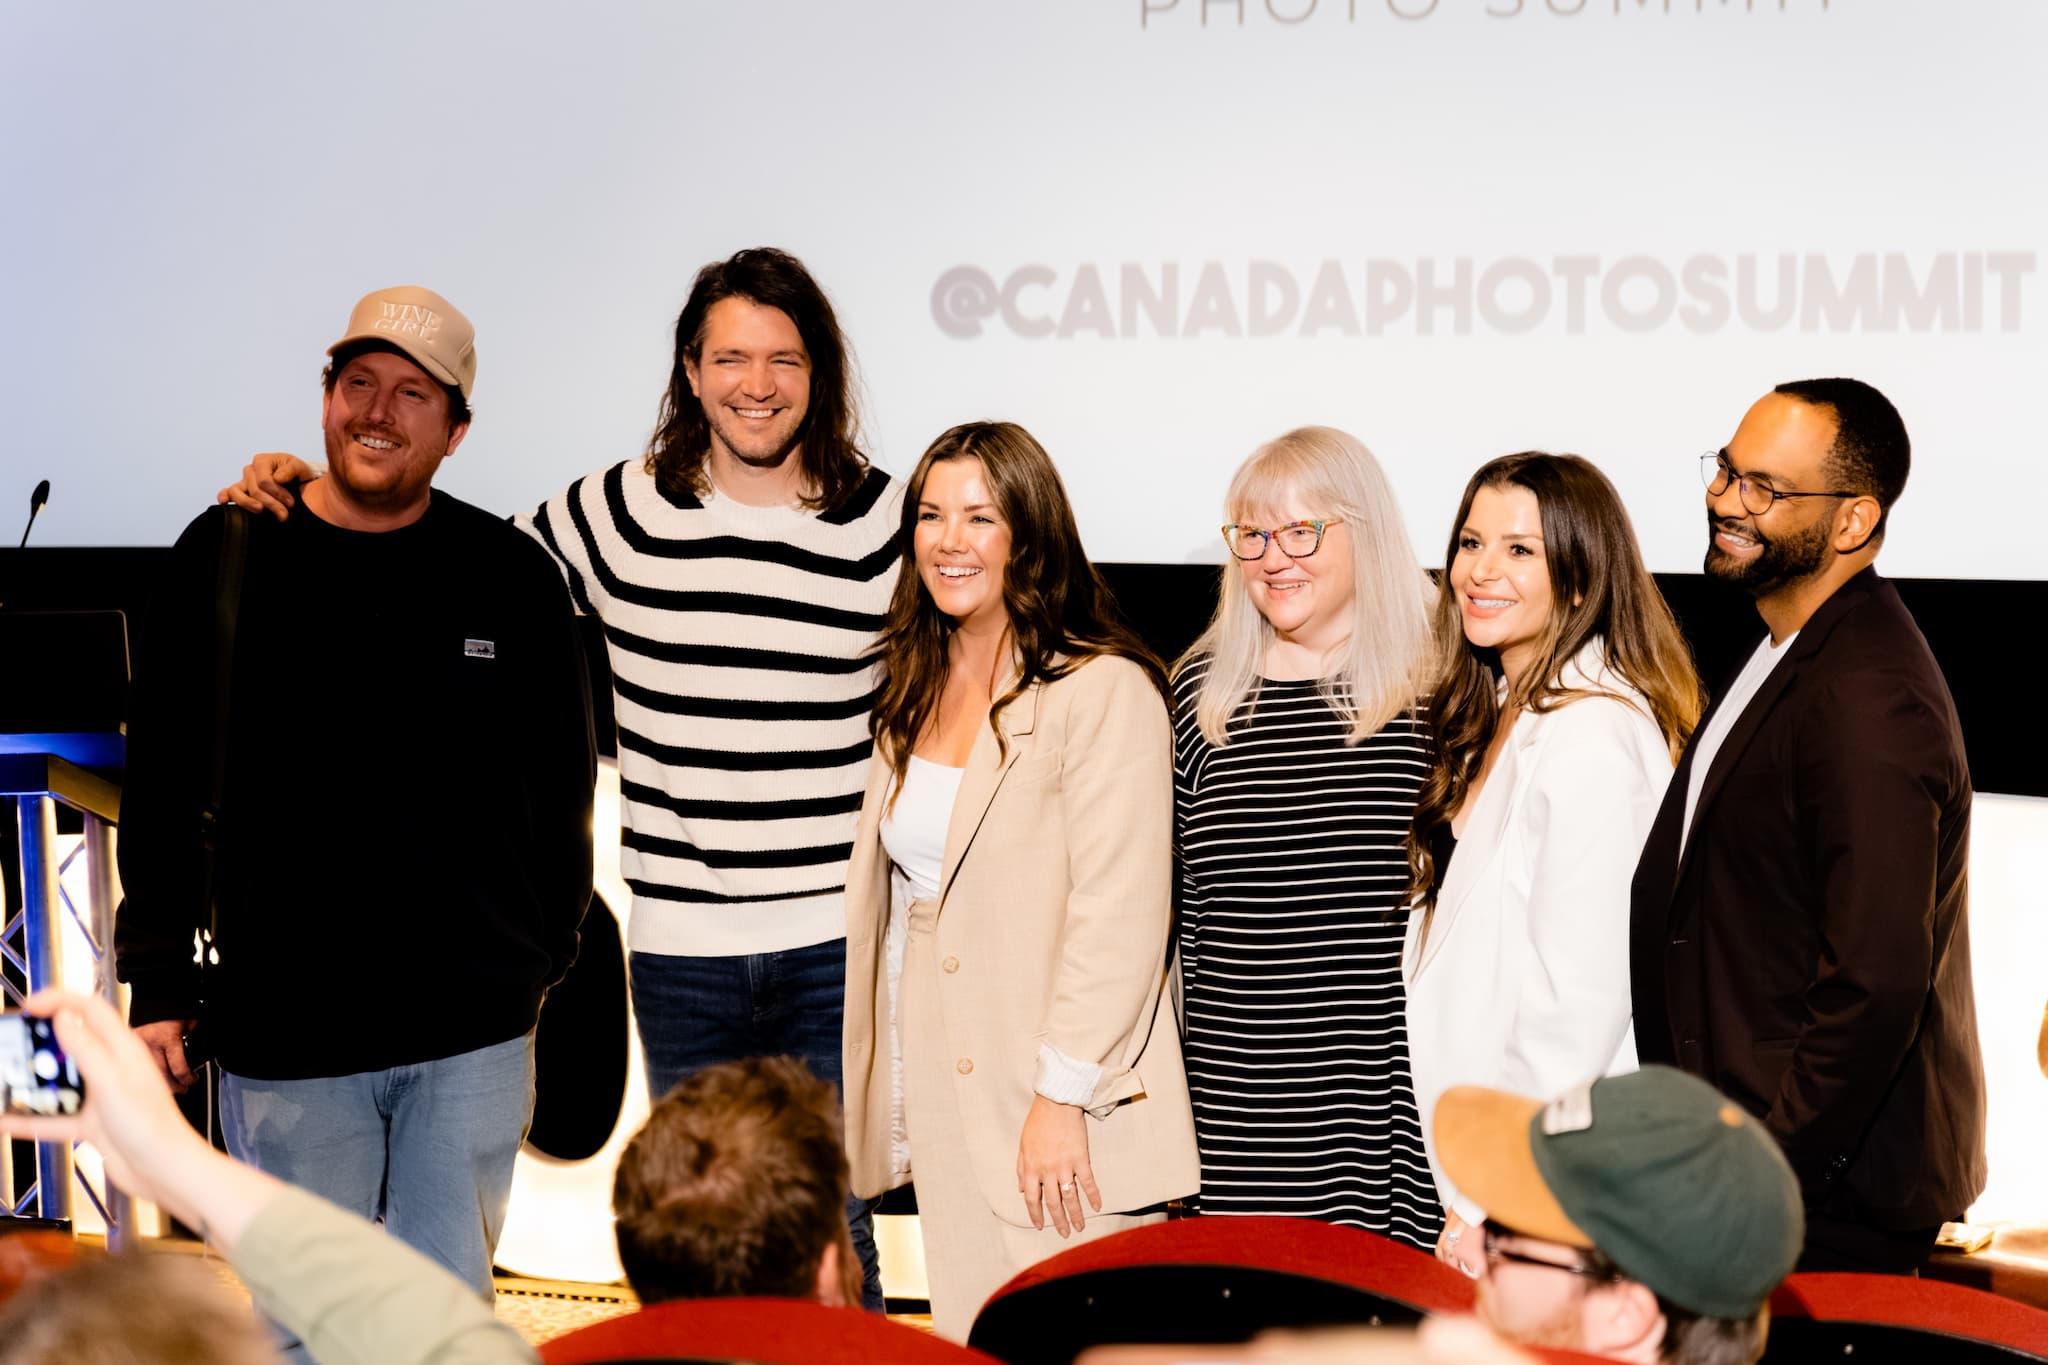 An Insider's View of the Canada Photo Summit 2023: A Celebration of Photography in Waterloo, Ontario